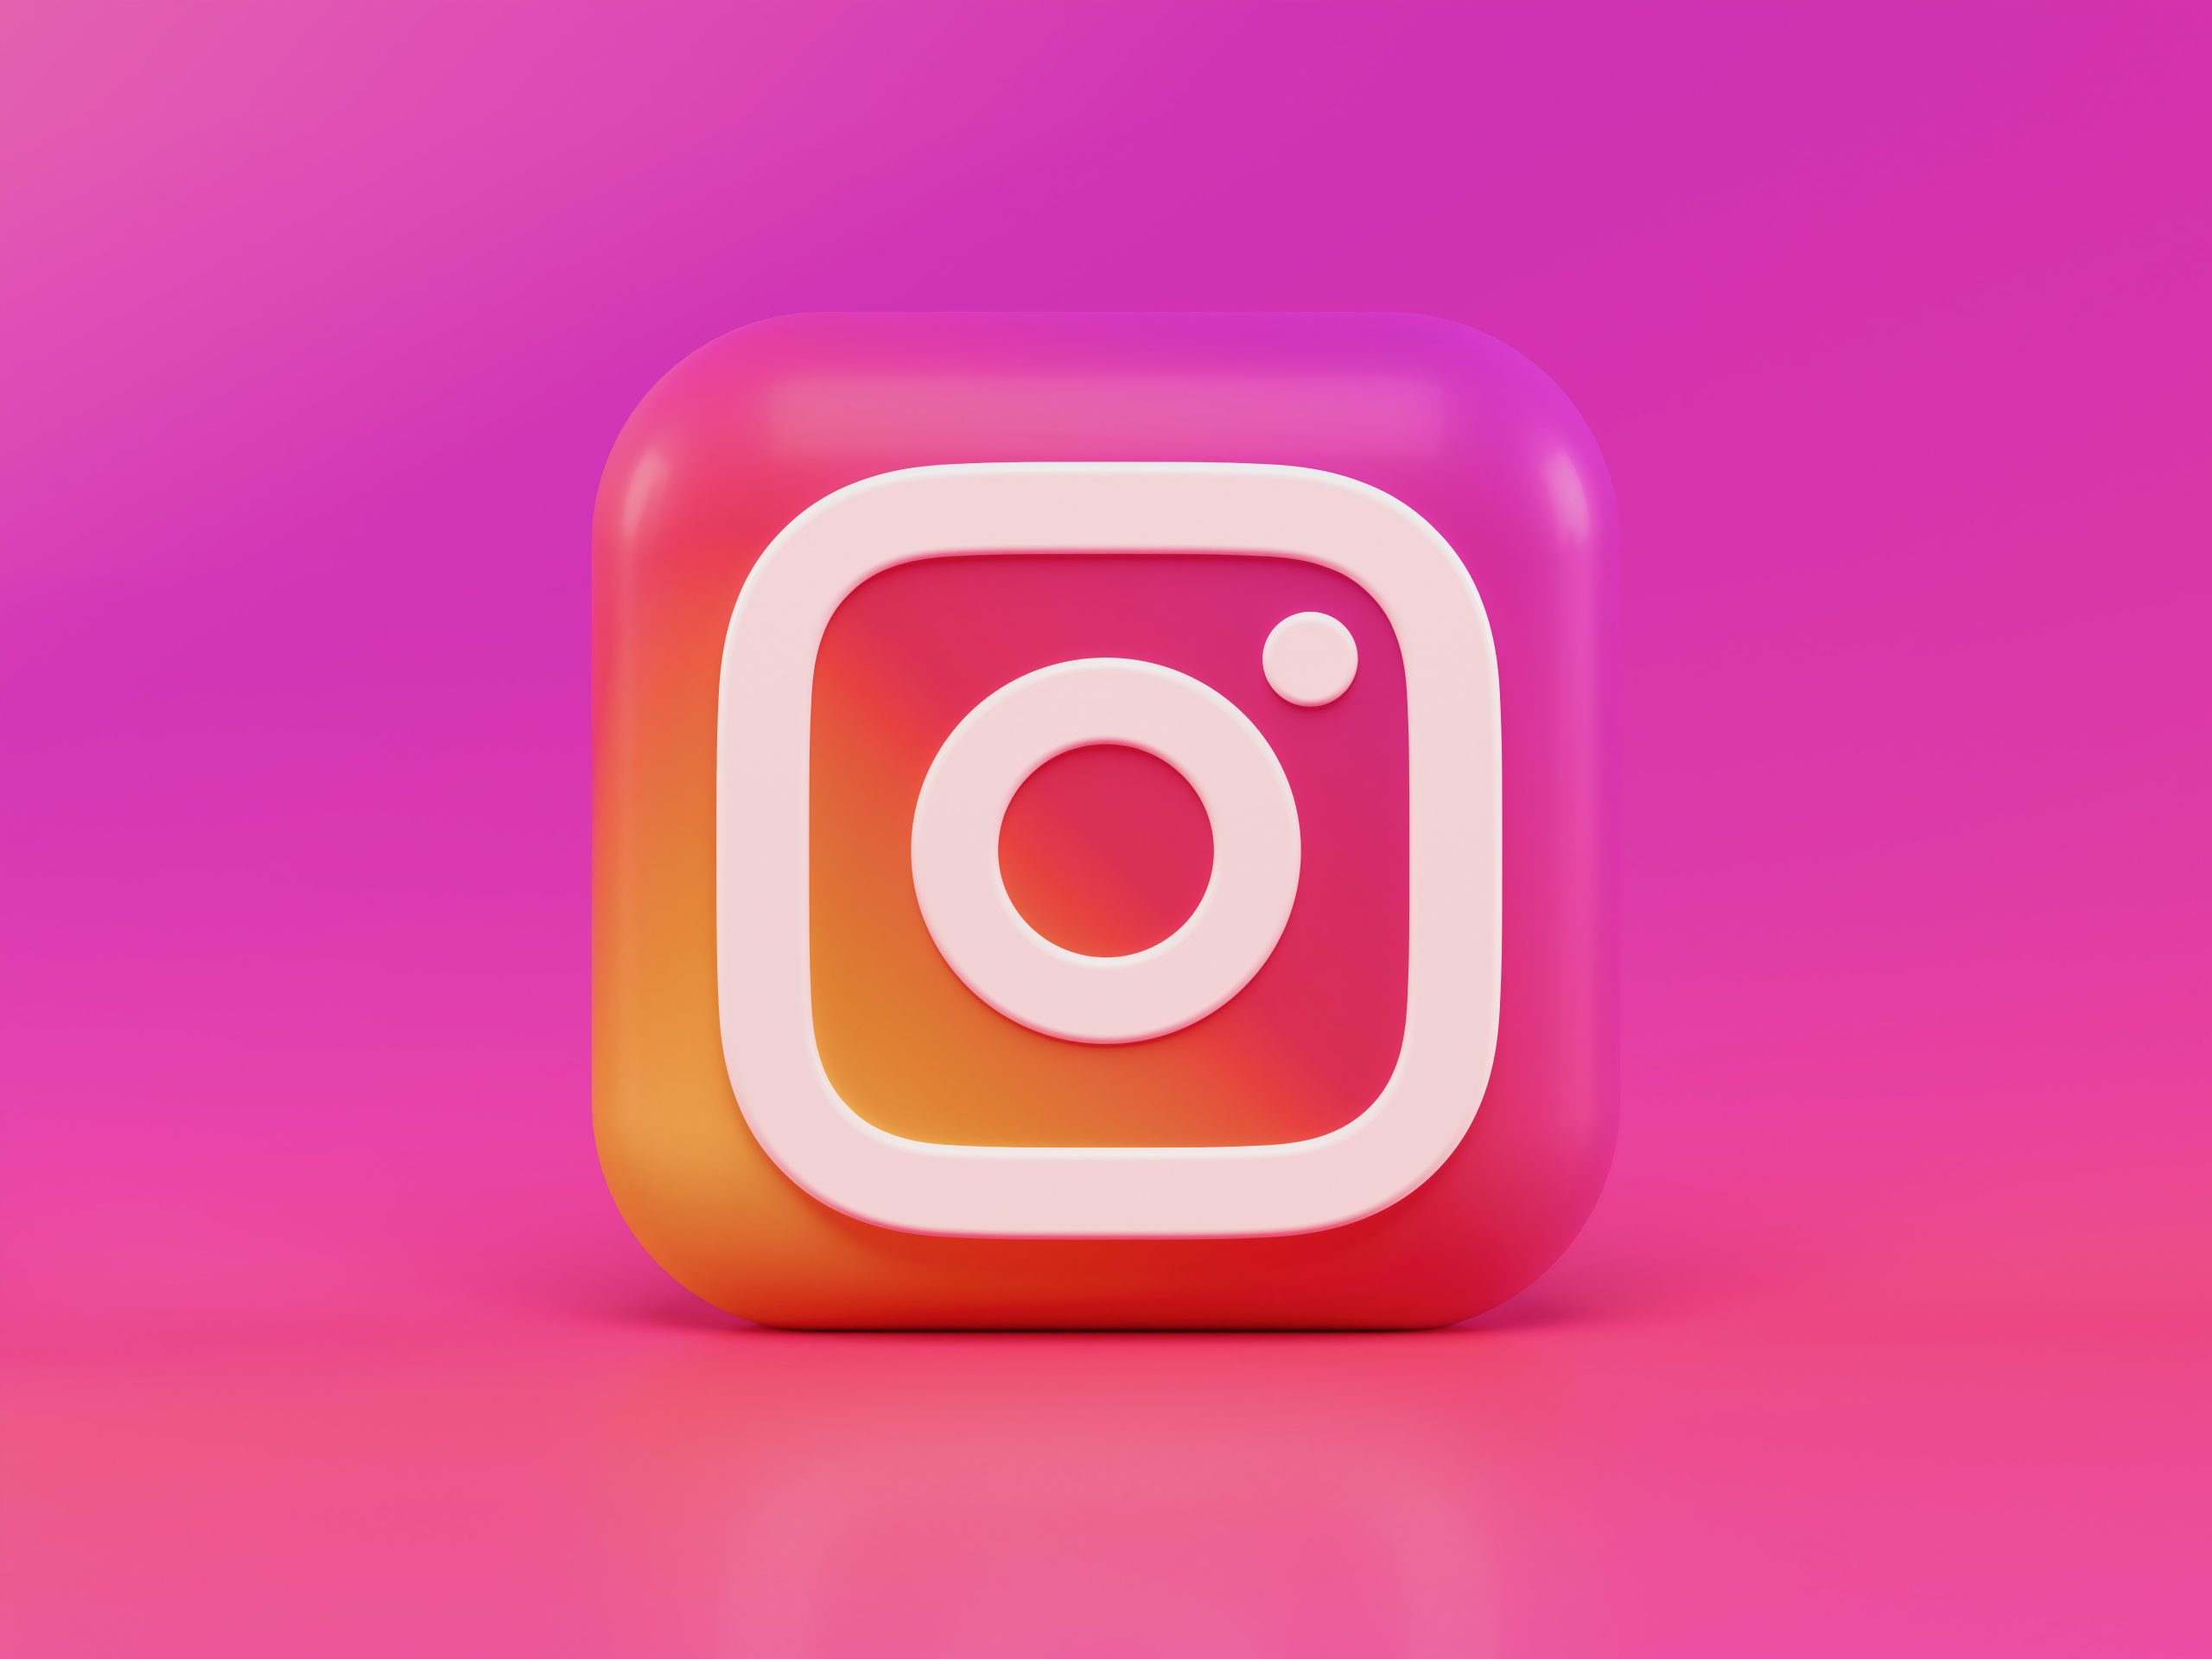 Why does Instagram look so different lately?